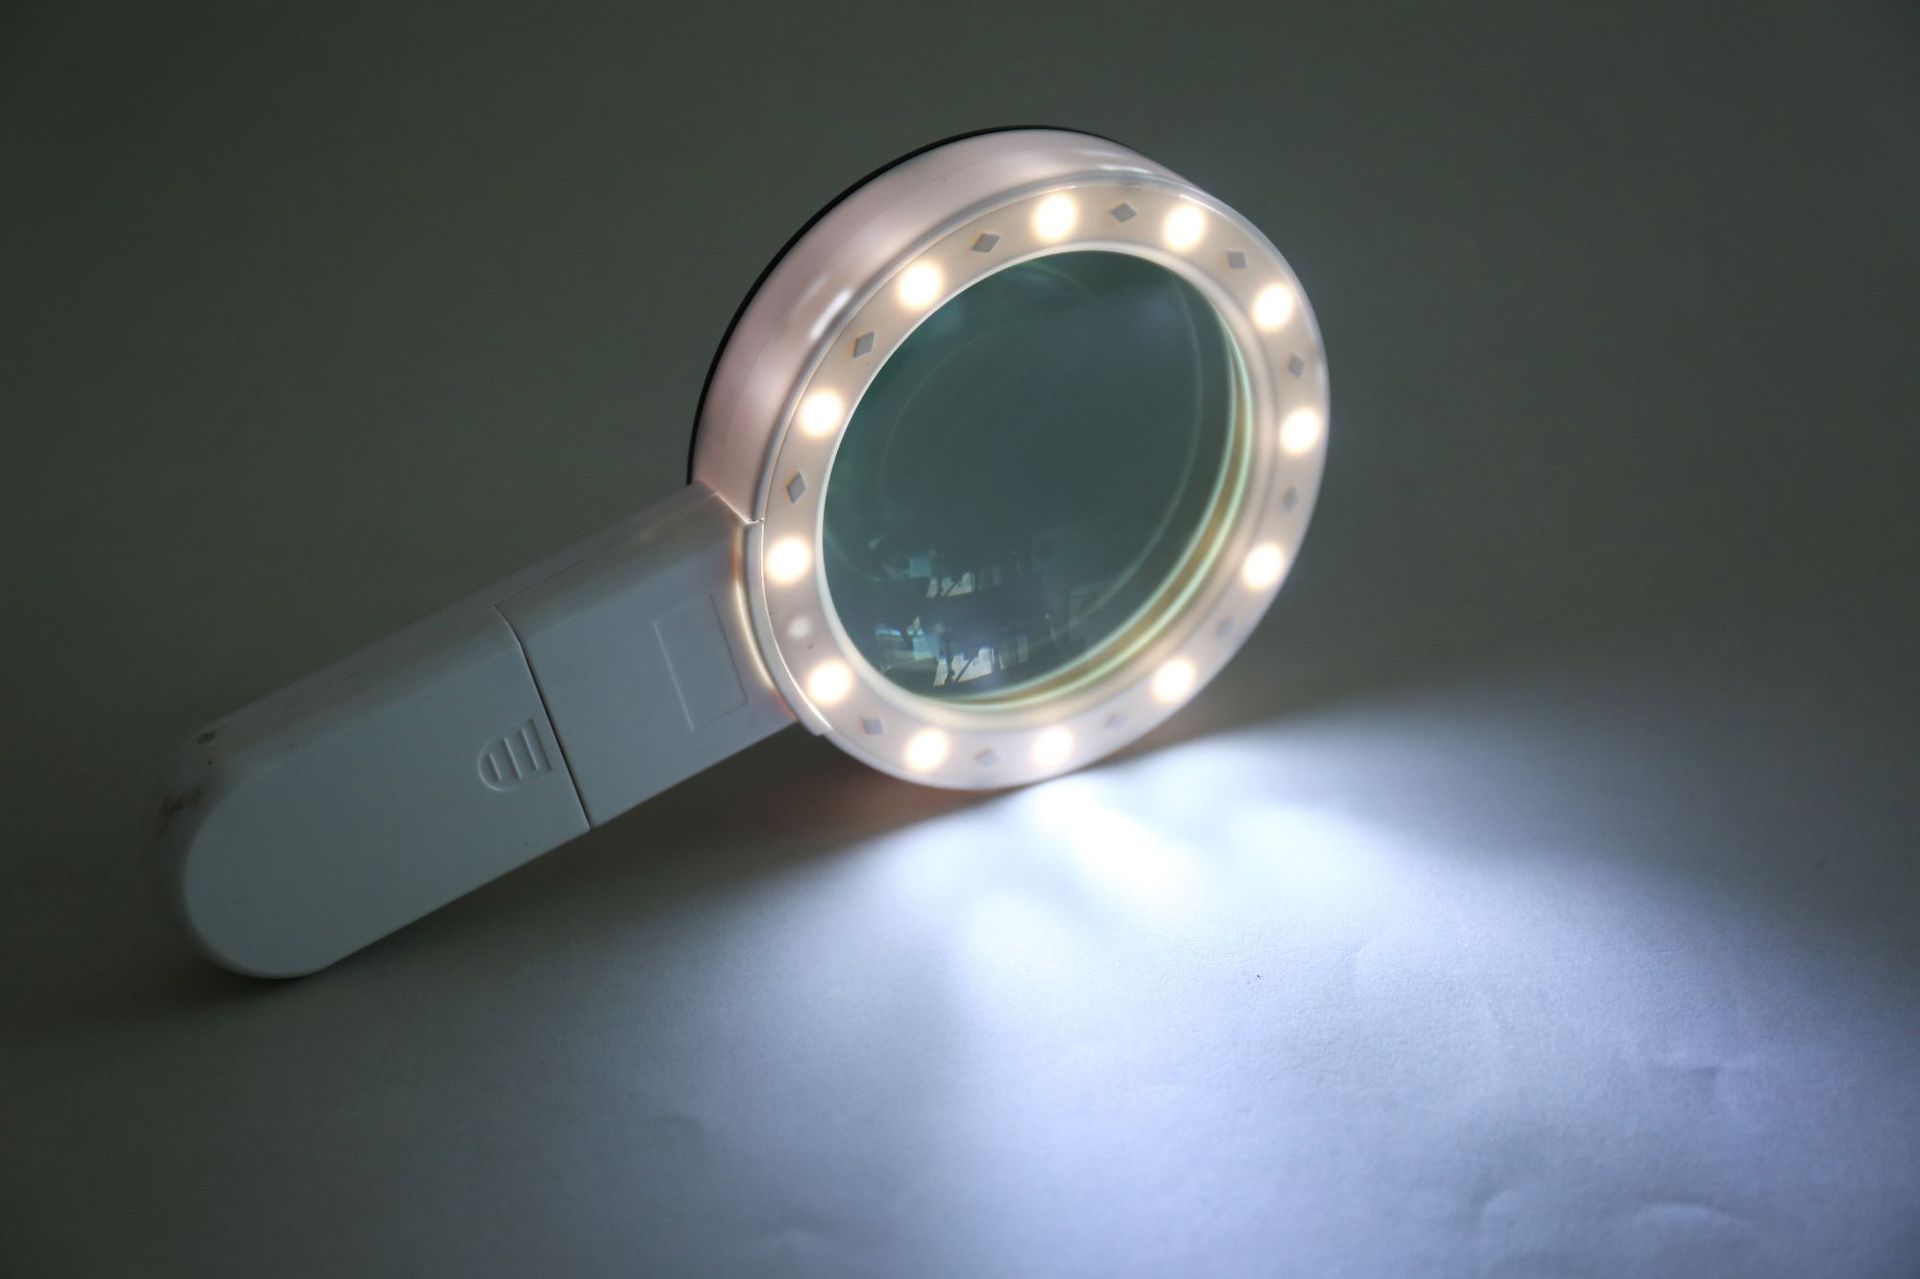 Kibtoy magnifying glass with LED lights